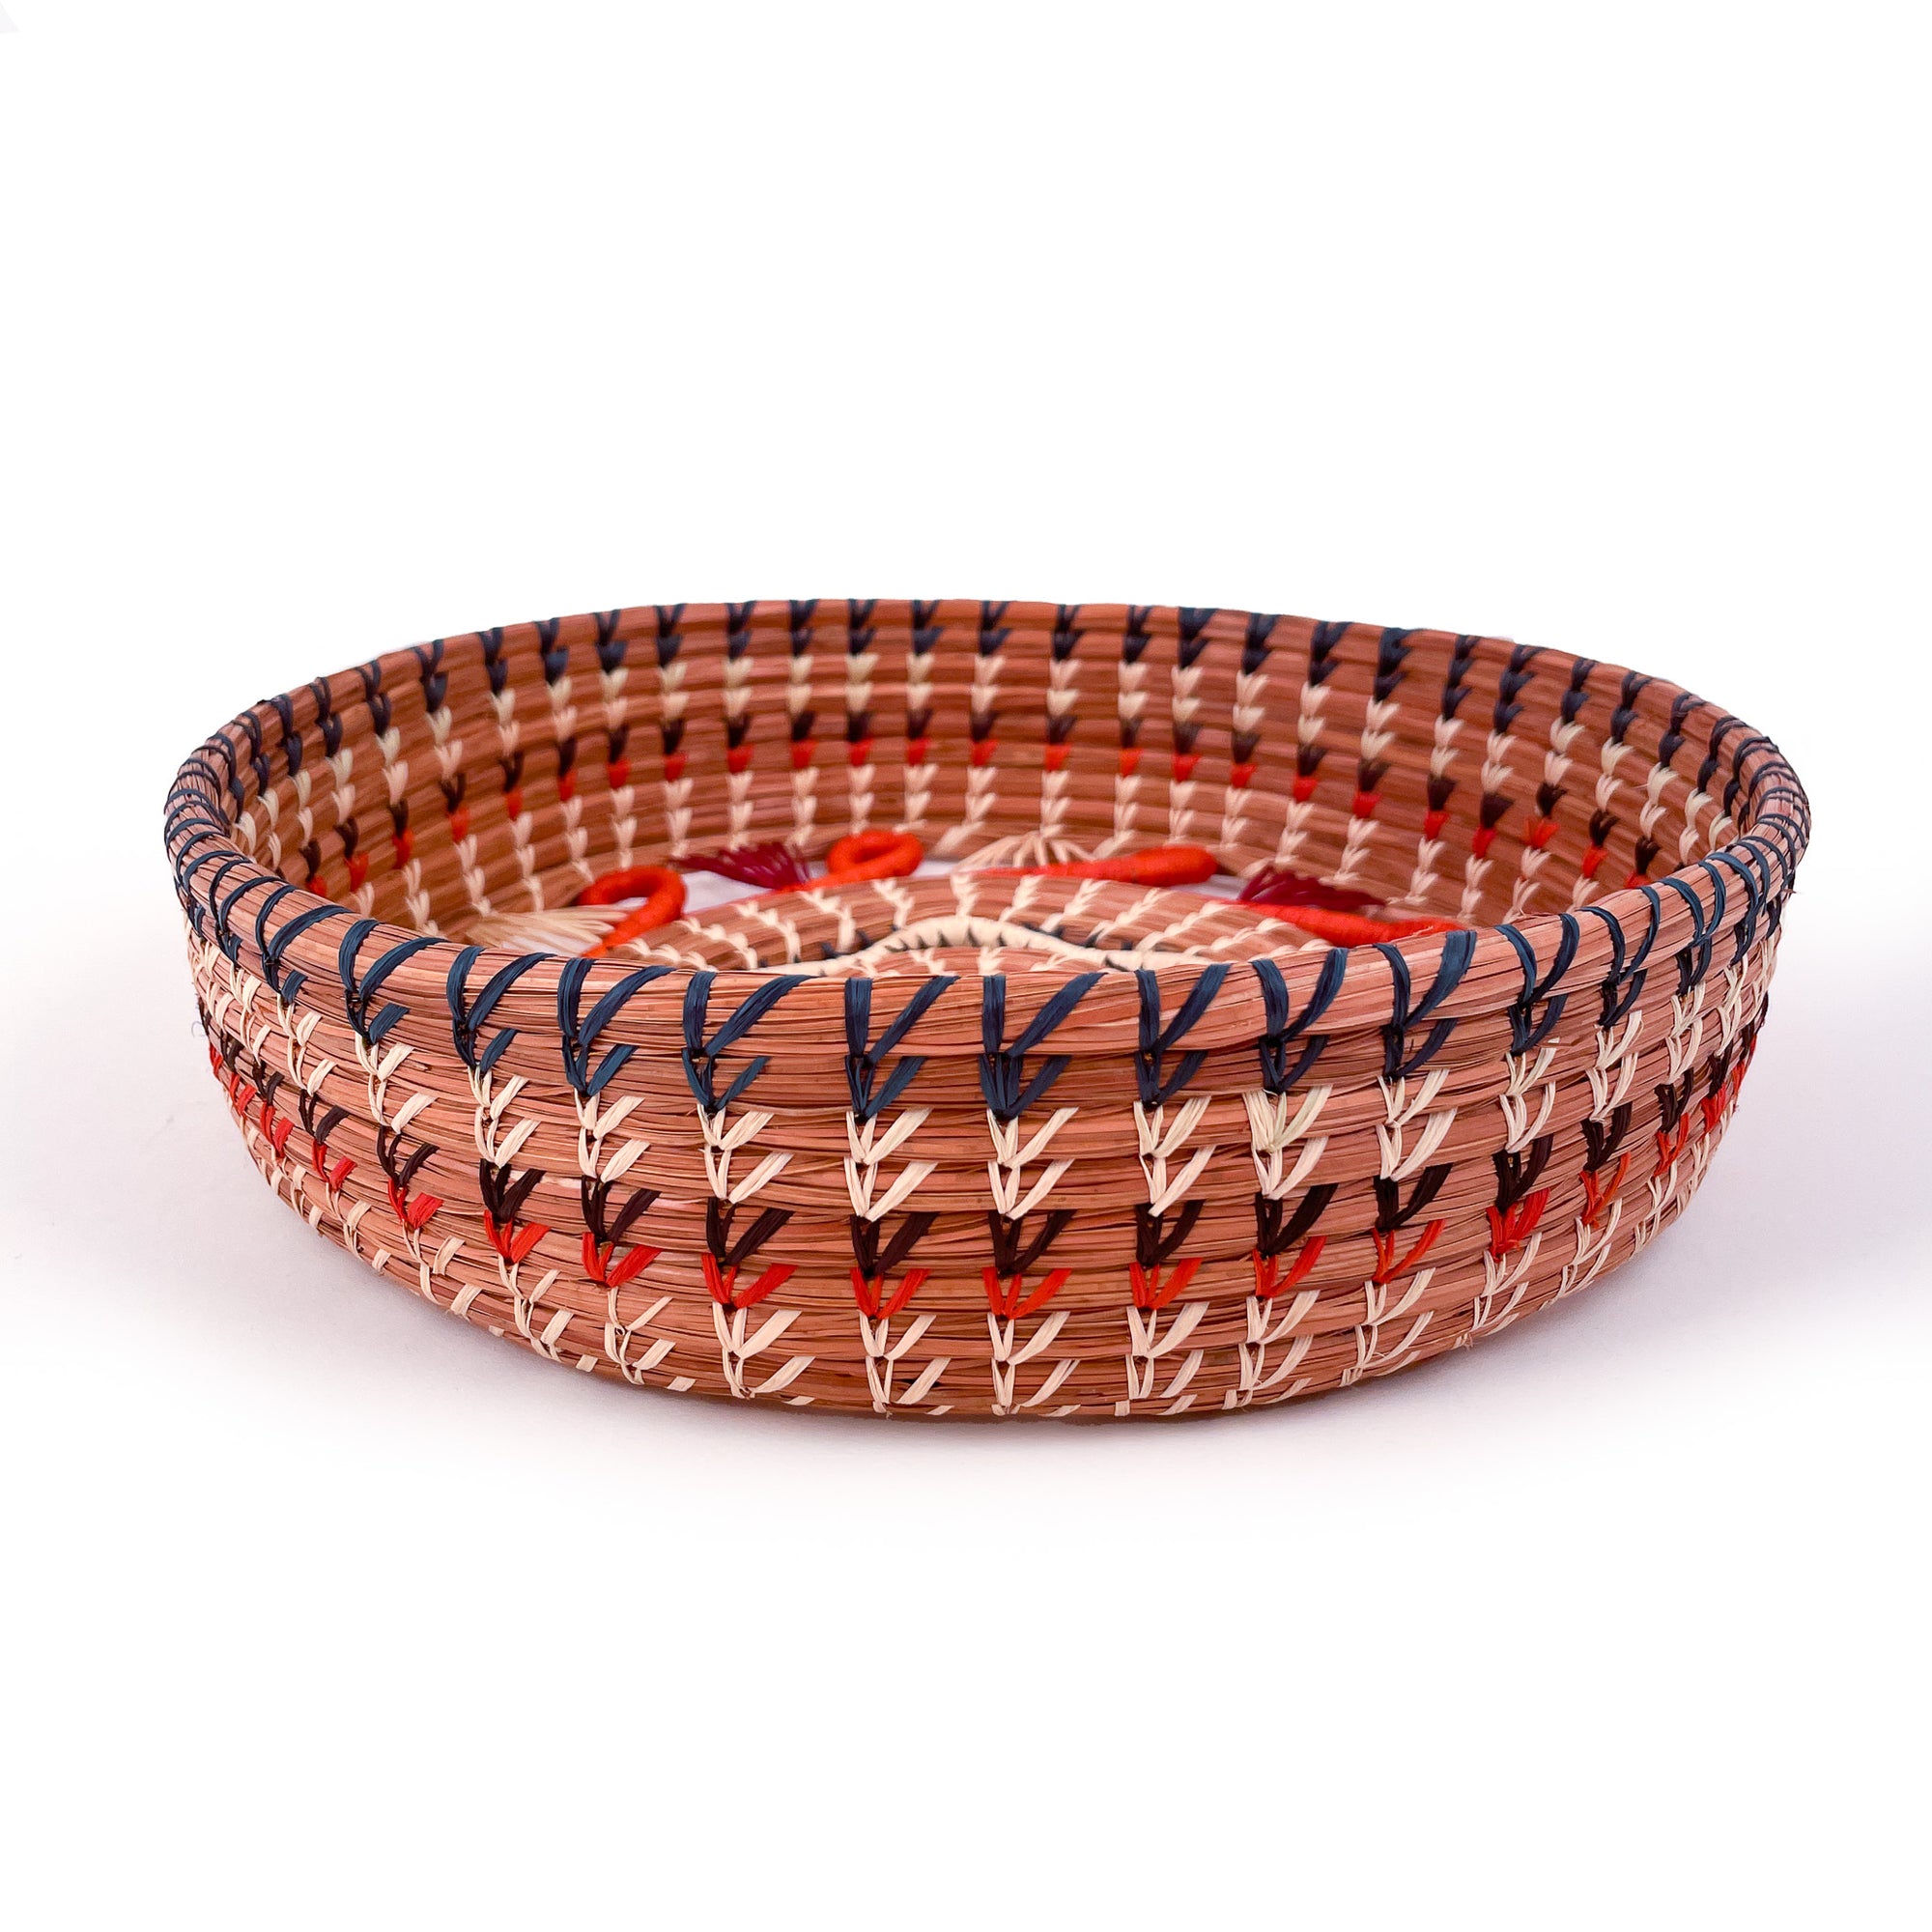 Front-facing view of Cristina Basket in Orange, a circular basket with star-shaped accent in center, surrounded by orange loop detail and intricate raffia stitching